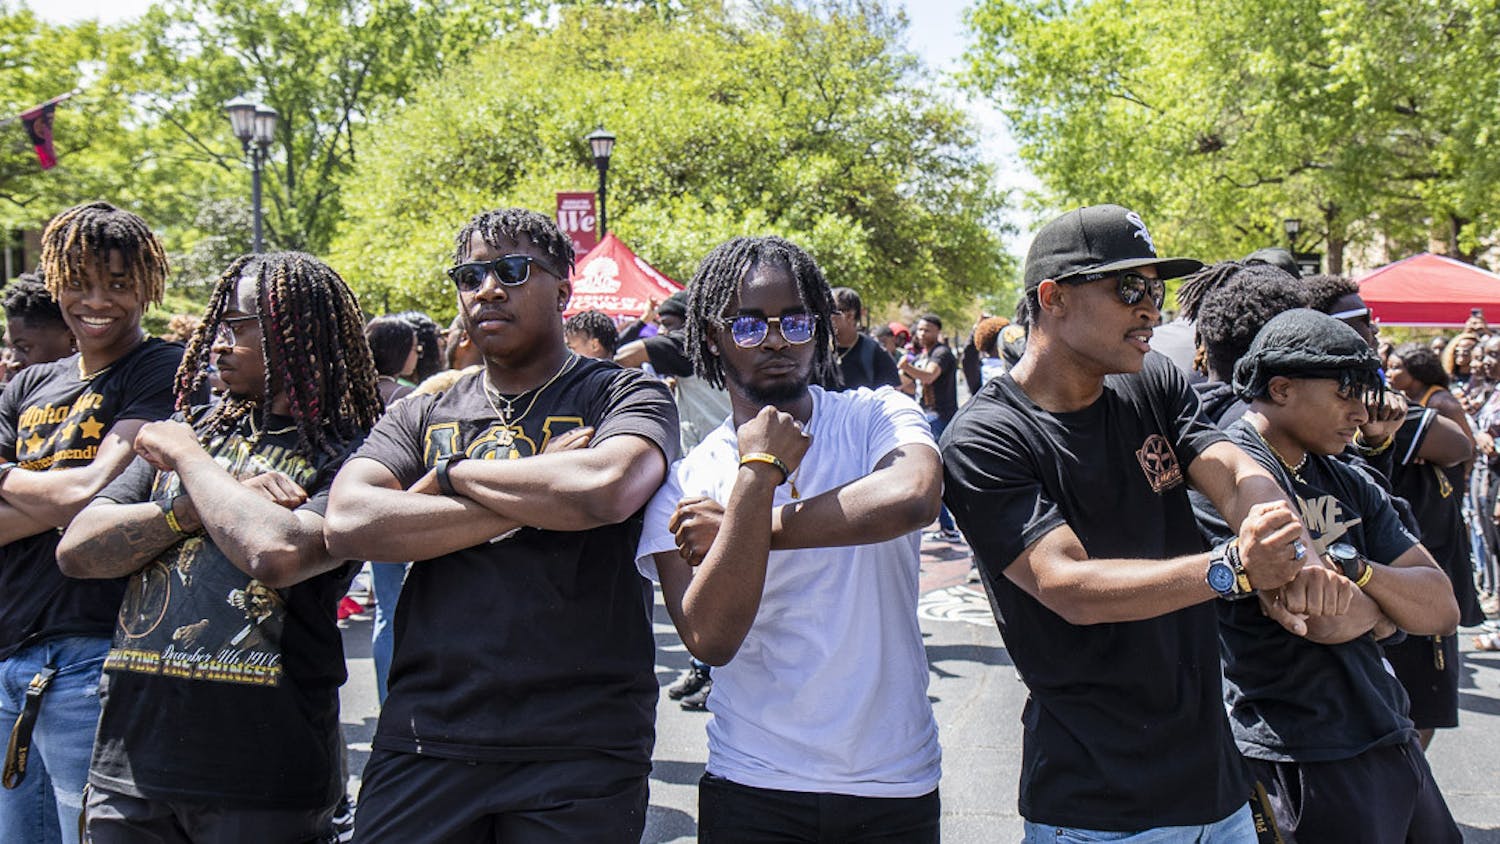 Members of the Alpha Phi Alpha fraternity step to the music during their weekly Hip Hop Wednesday event on Greene Street. The event is hosted by the National Pan-Hellenic Council and allows members of the nine Black fraternities and sororities on campus to come together and share their culture.